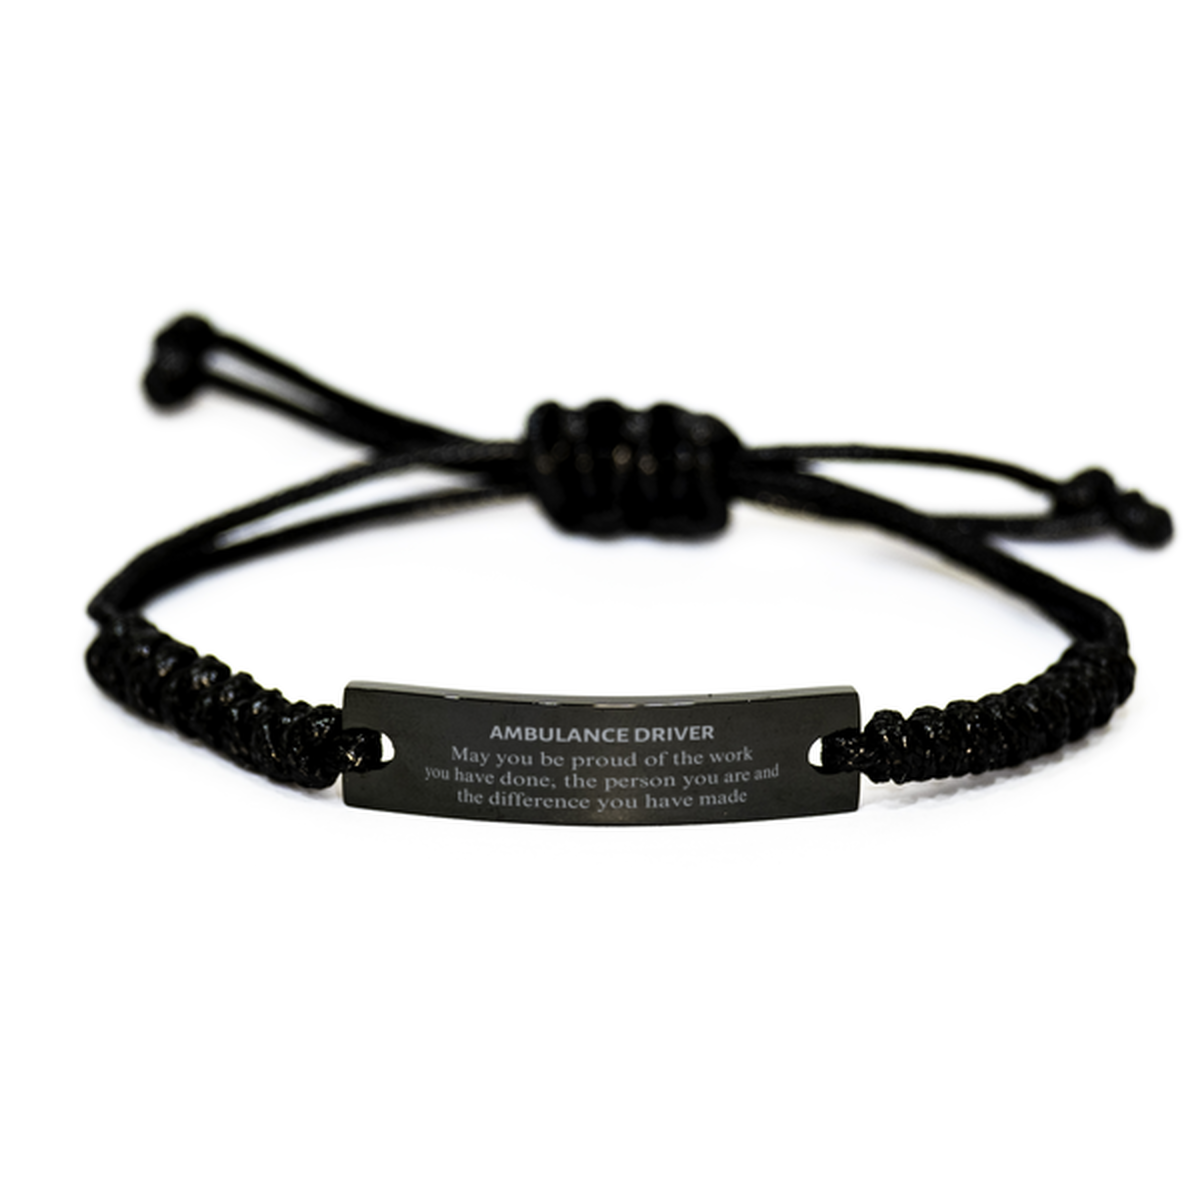 Ambulance Driver May you be proud of the work you have done, Retirement Ambulance Driver Black Rope Bracelet for Colleague Appreciation Gifts Amazing for Ambulance Driver